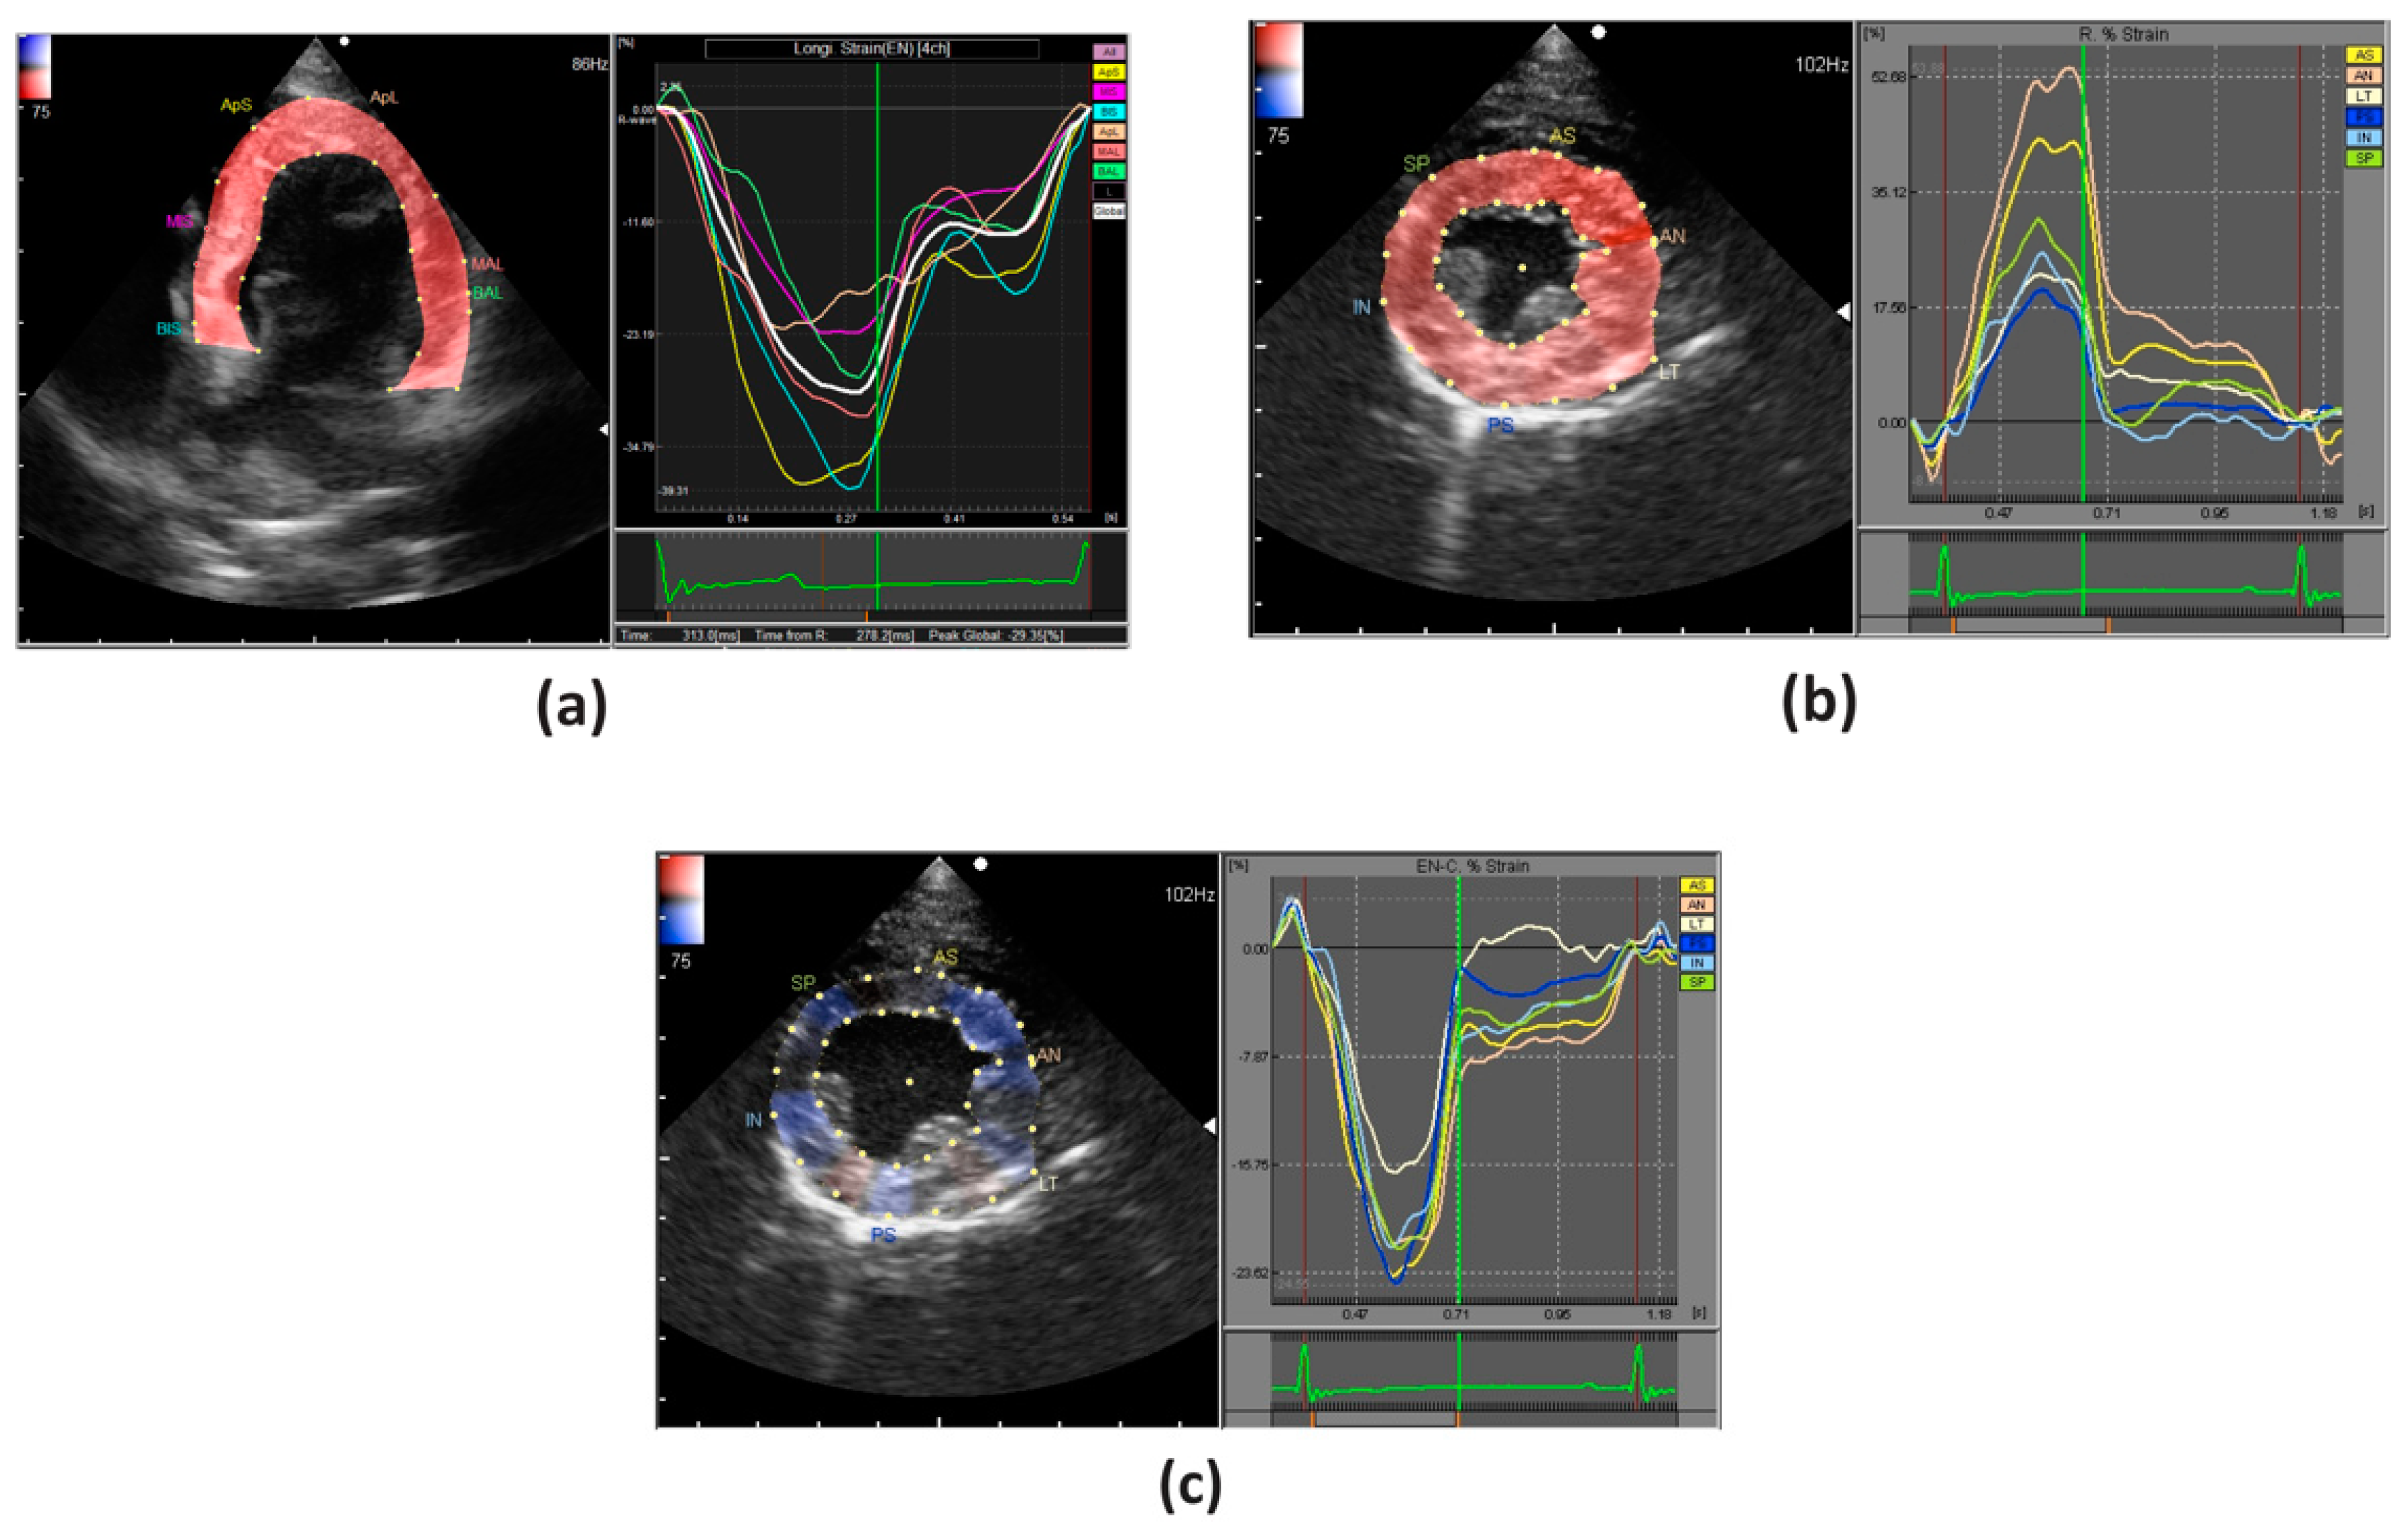 Age-related normal range of left ventricular strain and torsion using  three-dimensional speckle-tracking echocardiography.